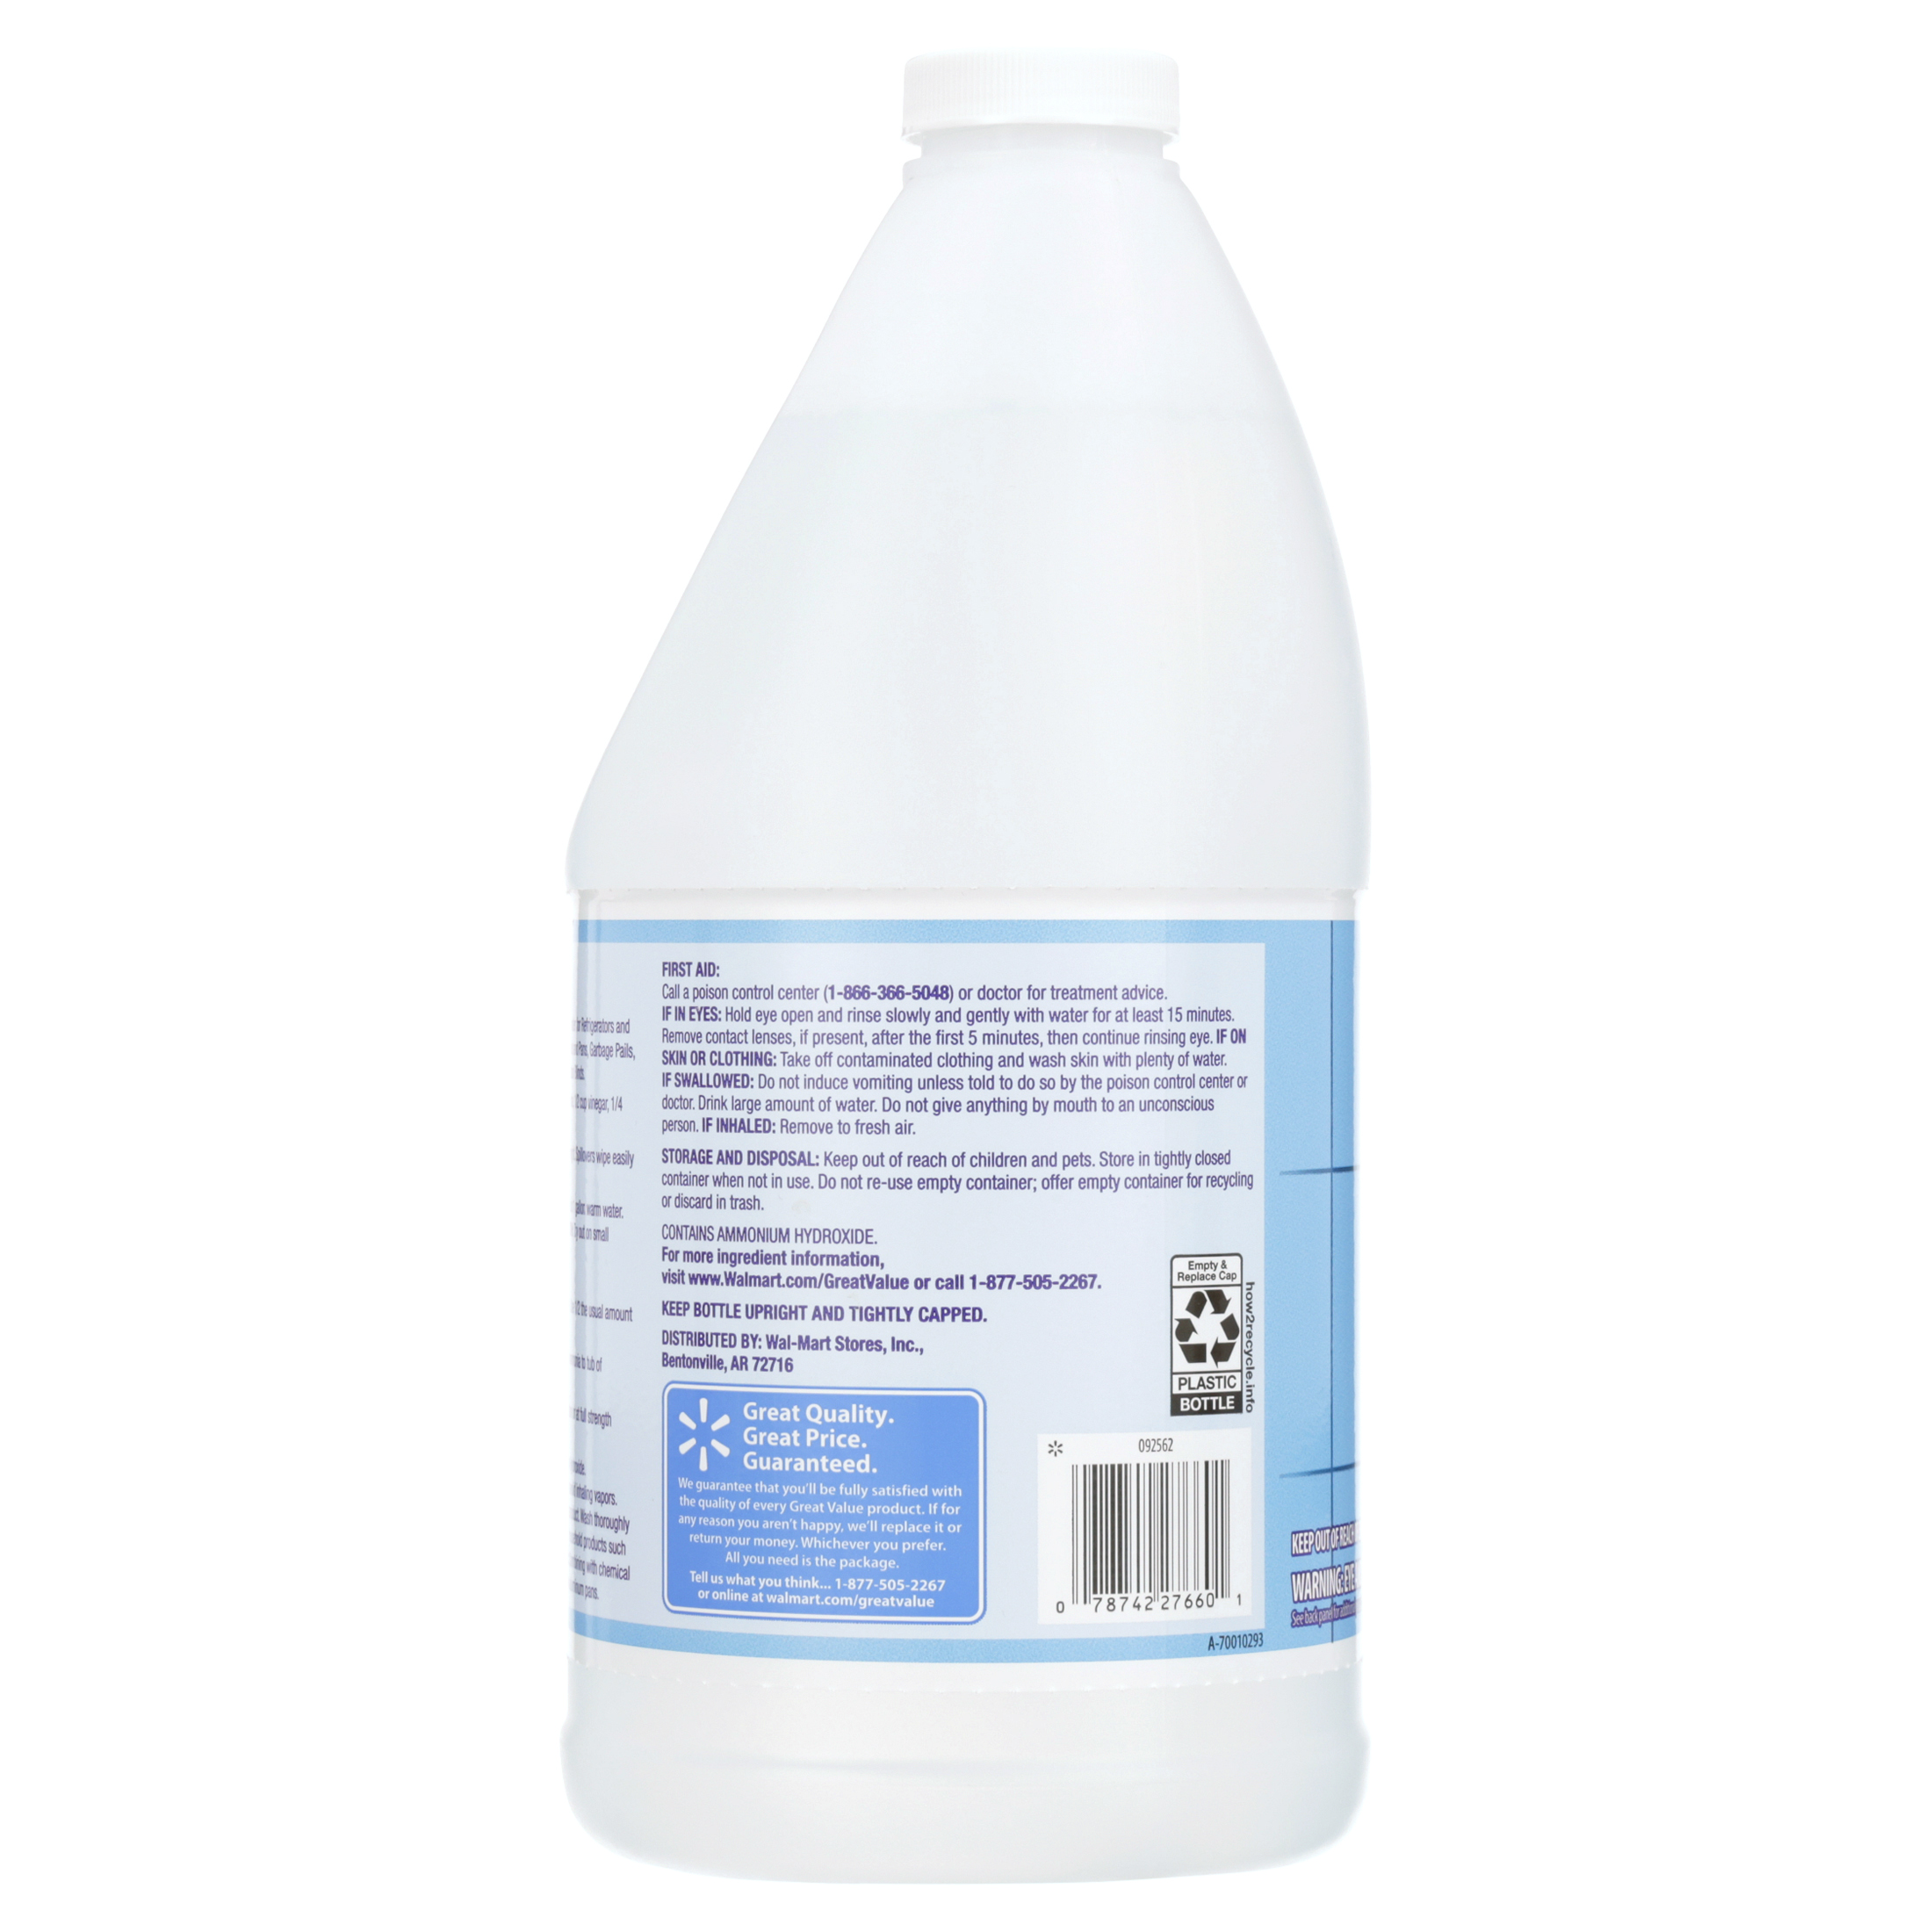 Great Value Clear Ammonia All-Purpose Cleaners, 64 fl oz - image 5 of 7